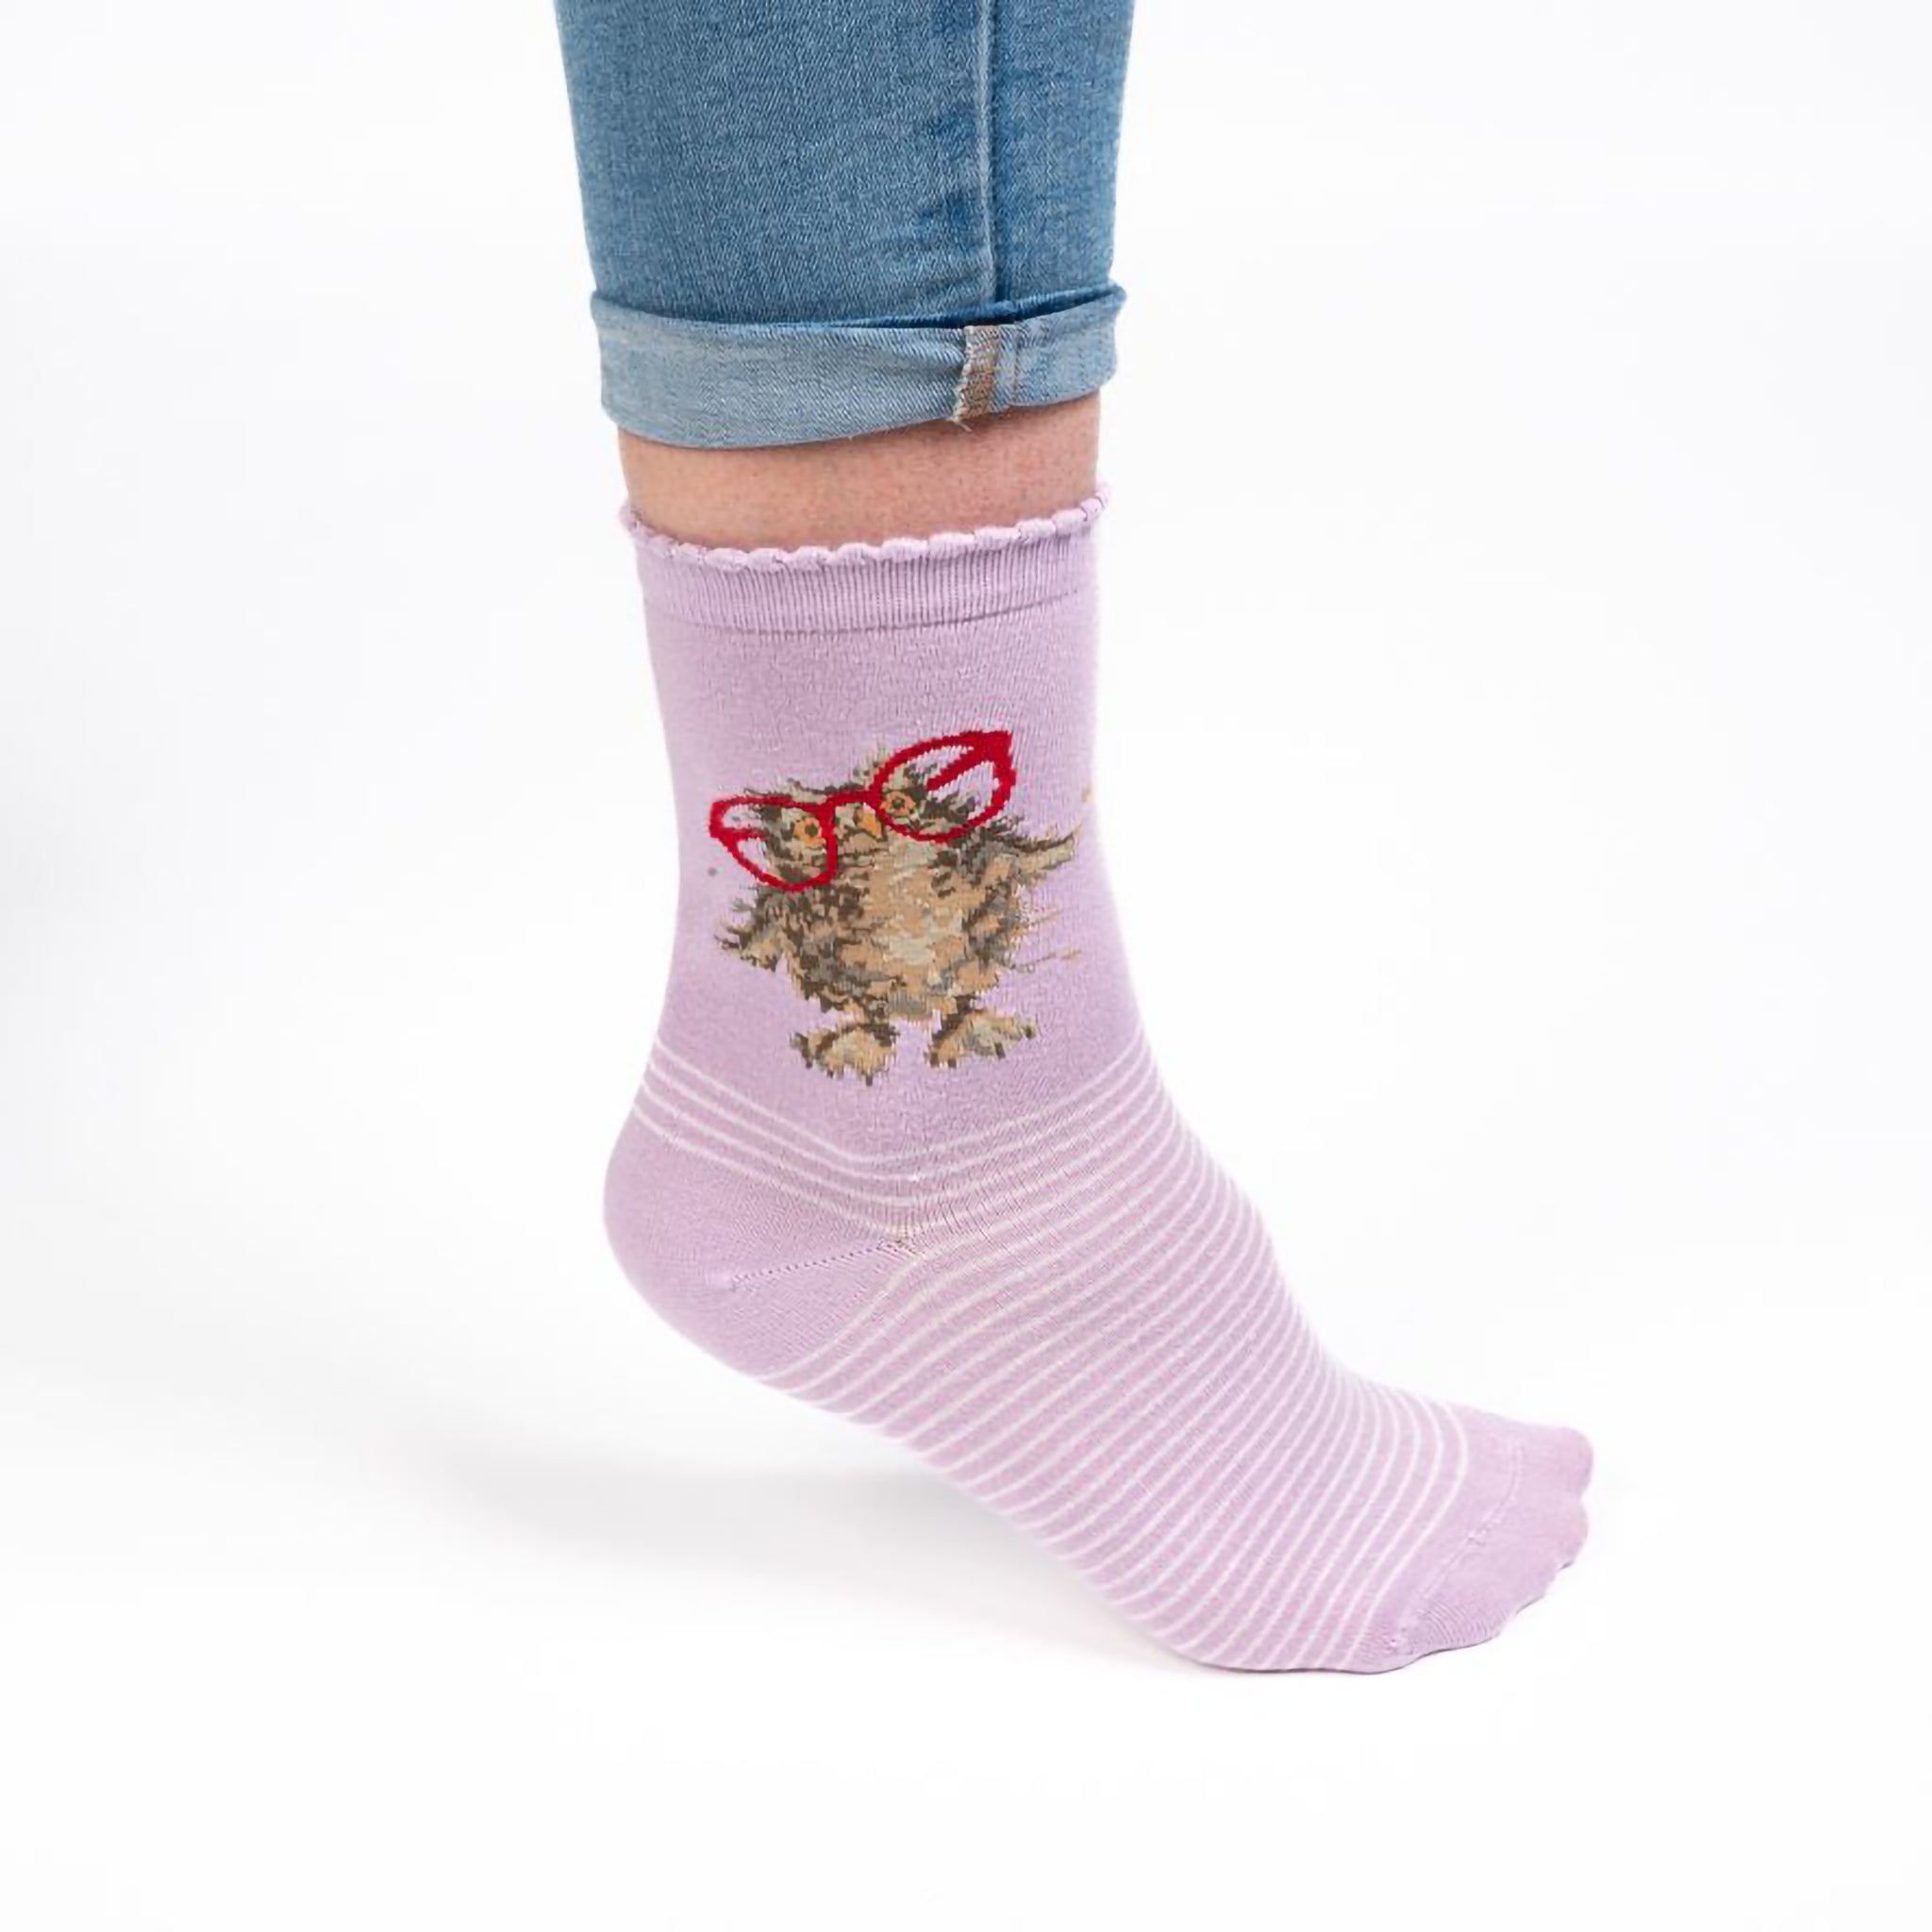 Model wearing a pair of lilac purple socks with a owl with red glasses picture and white stripes